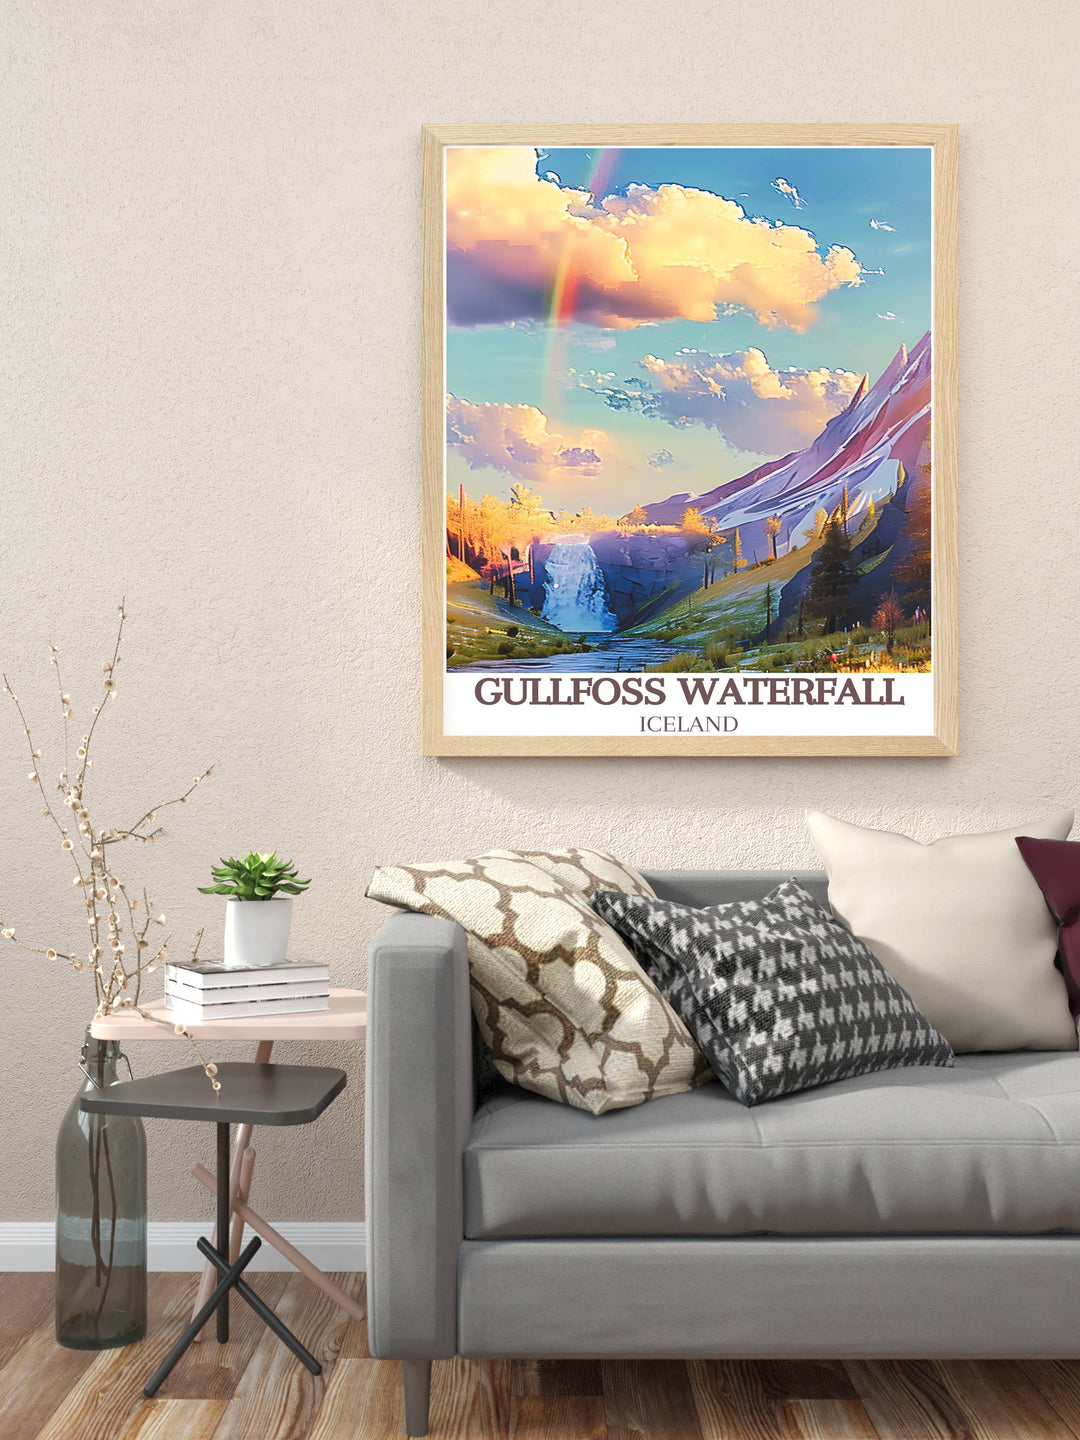 The dynamic interaction of light and water at Gullfoss Waterfall creating a rainbow, showcased in a framed travel art piece